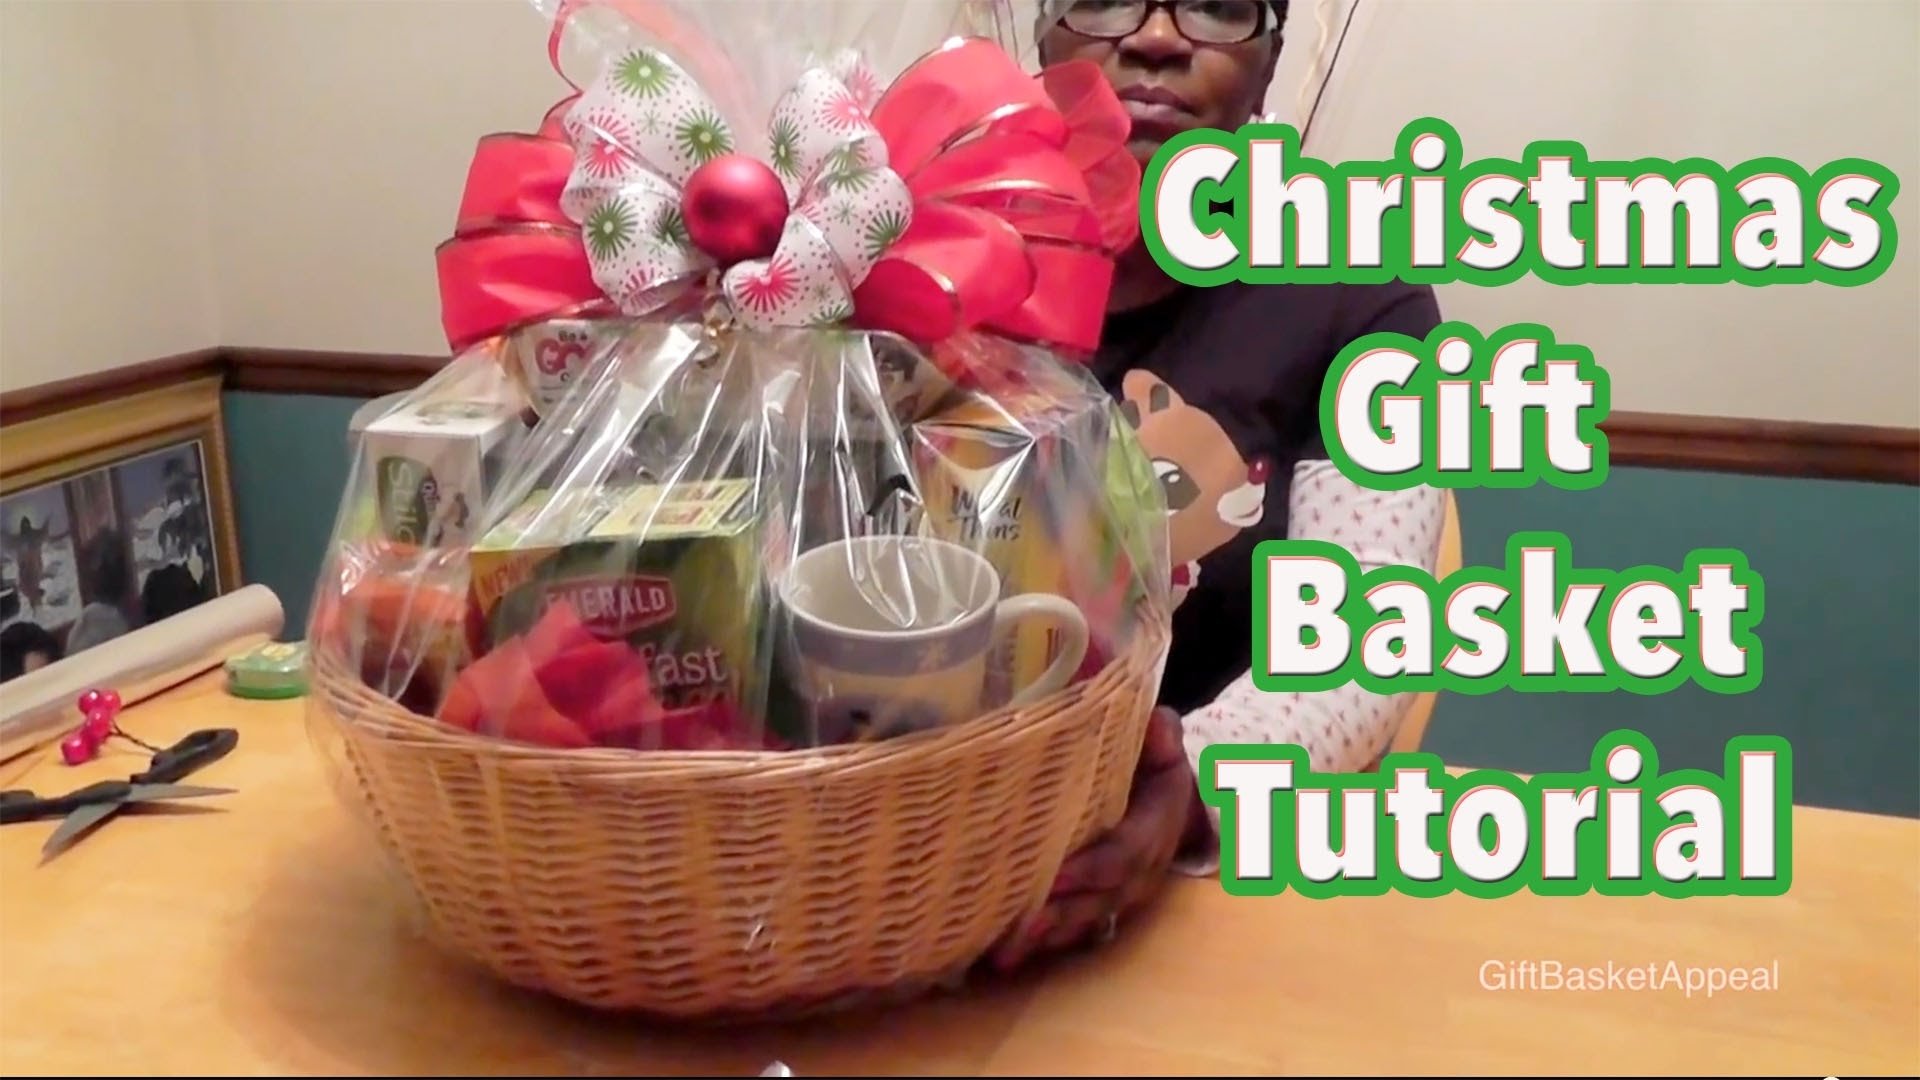 10 Great Gift Basket Ideas For Christmas diy gift basket tutorial christmas gift basket giftbasketappeal 2022